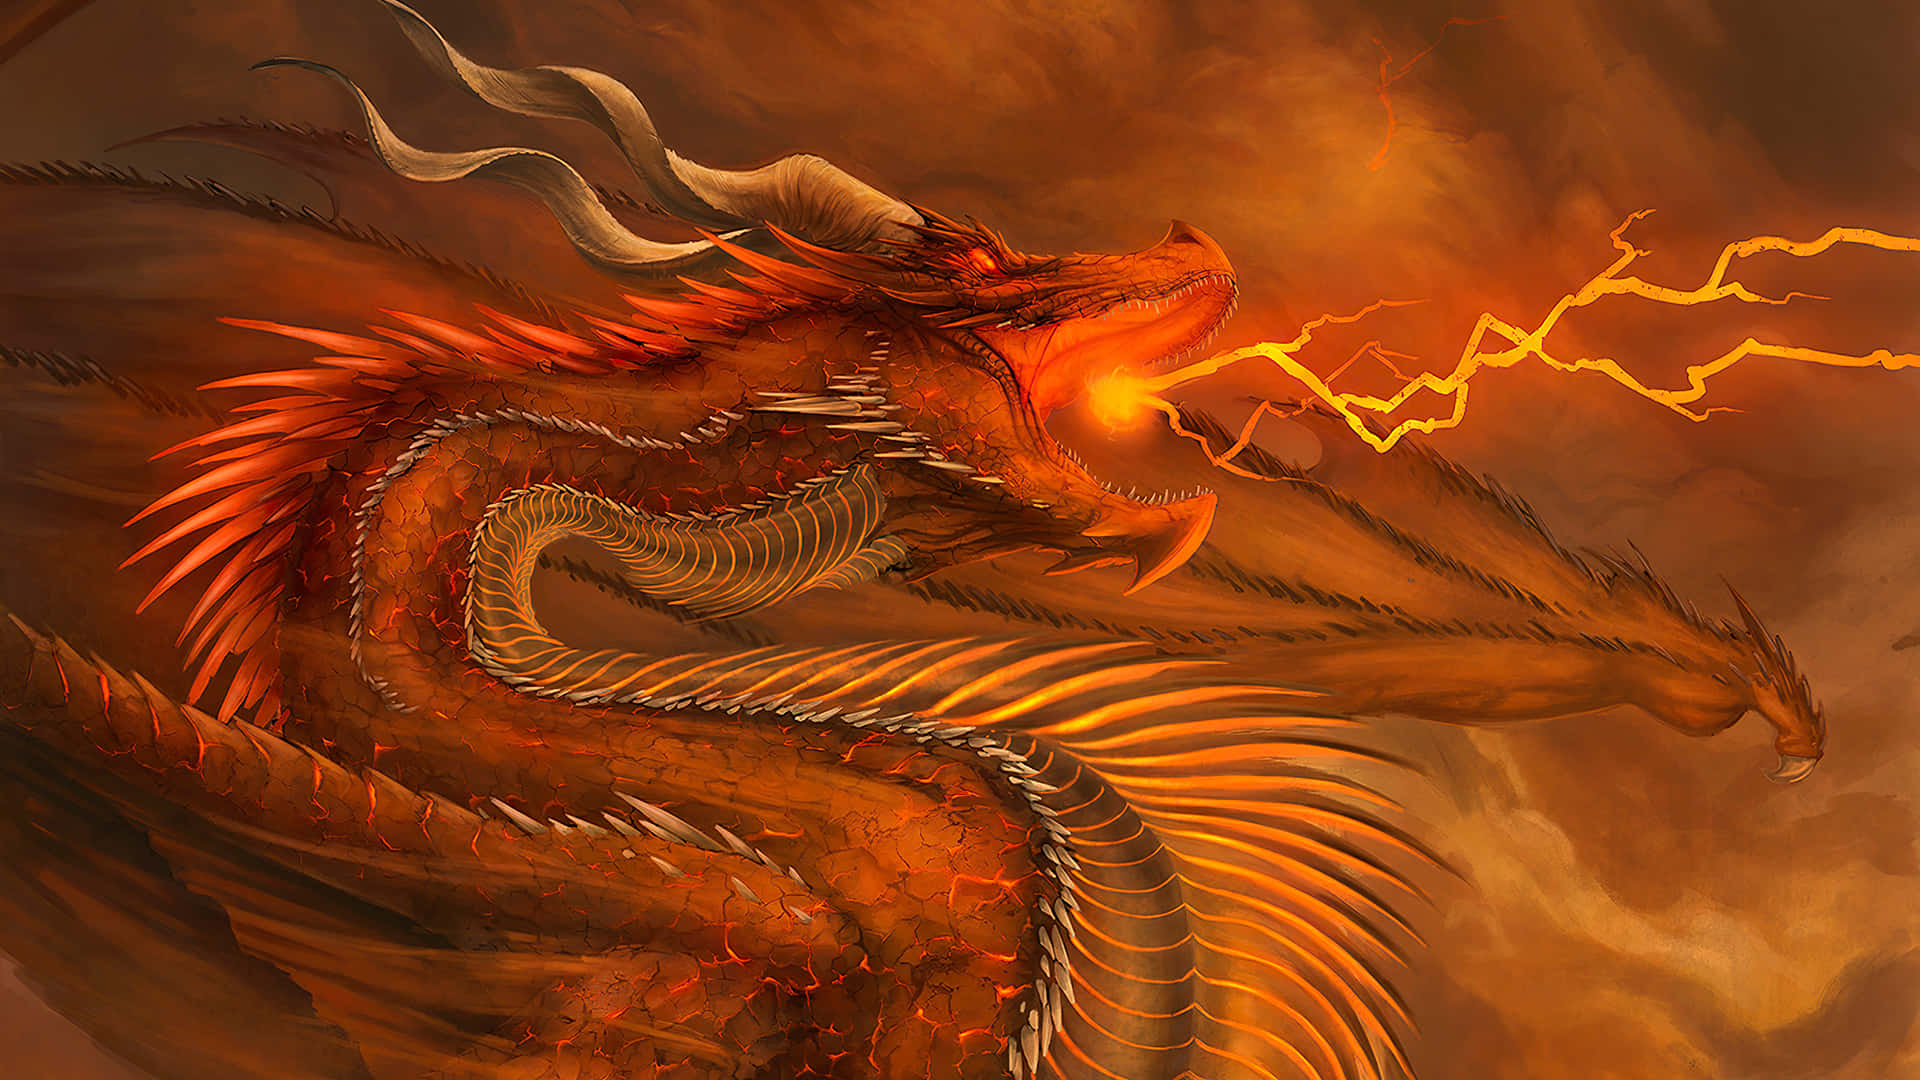 Image  An Epic Dragon Rises and Glides Through the Night Sky Wallpaper